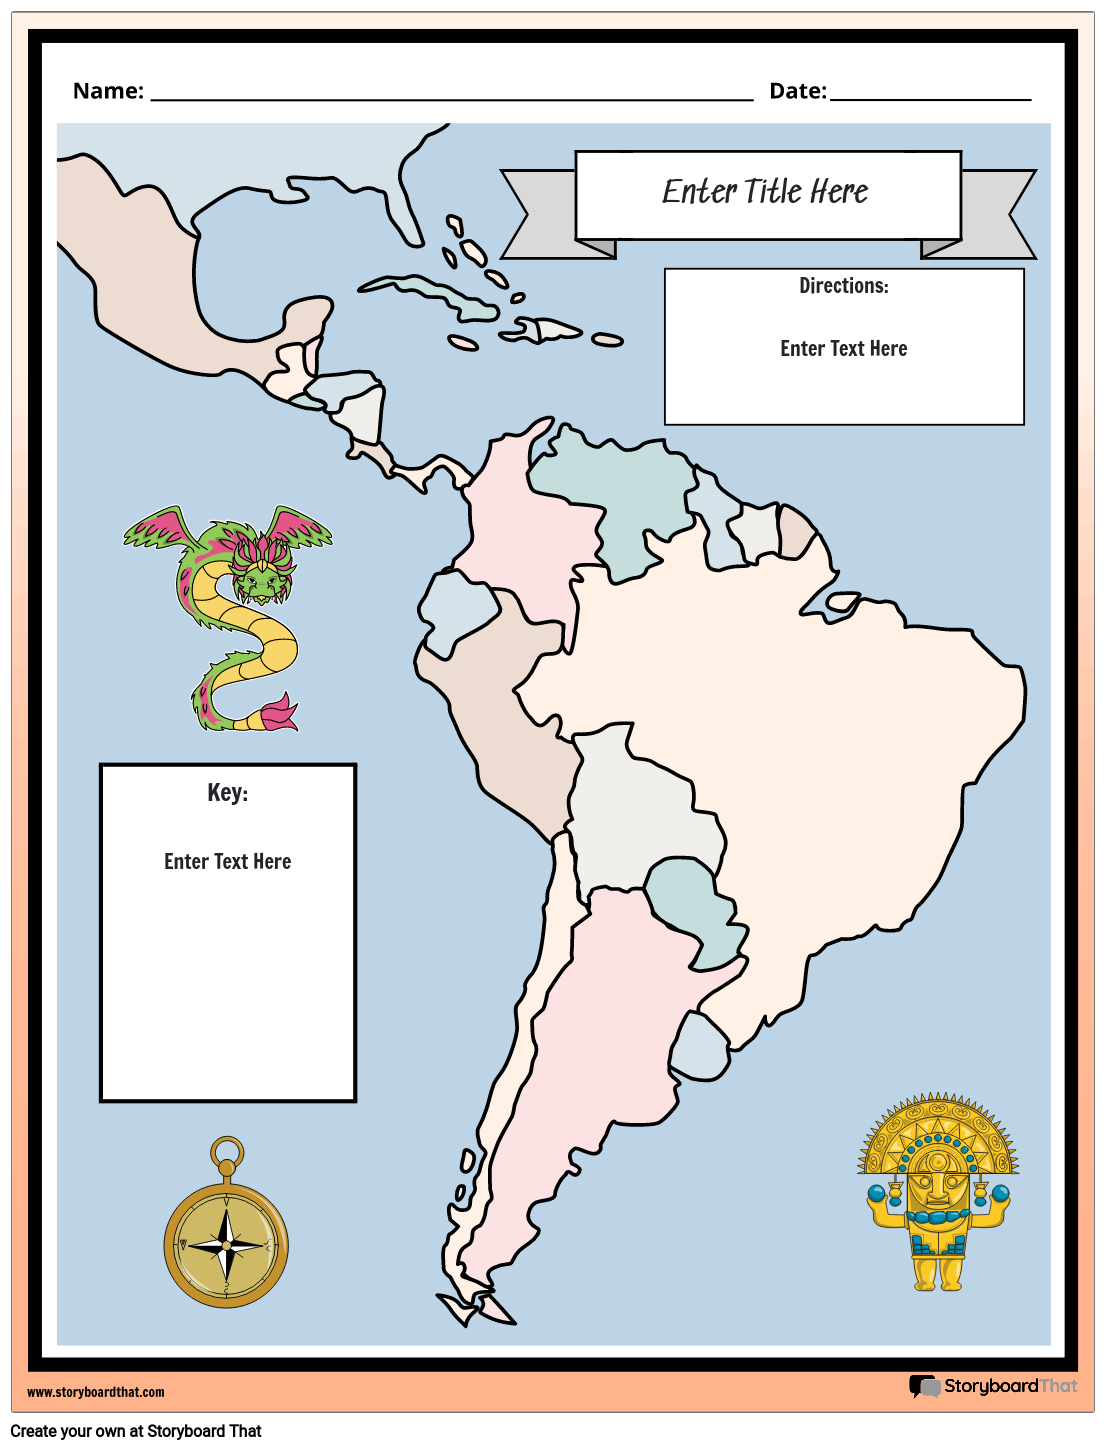 carte-maya-azt-que-et-inca-storyboard-by-fr-examples